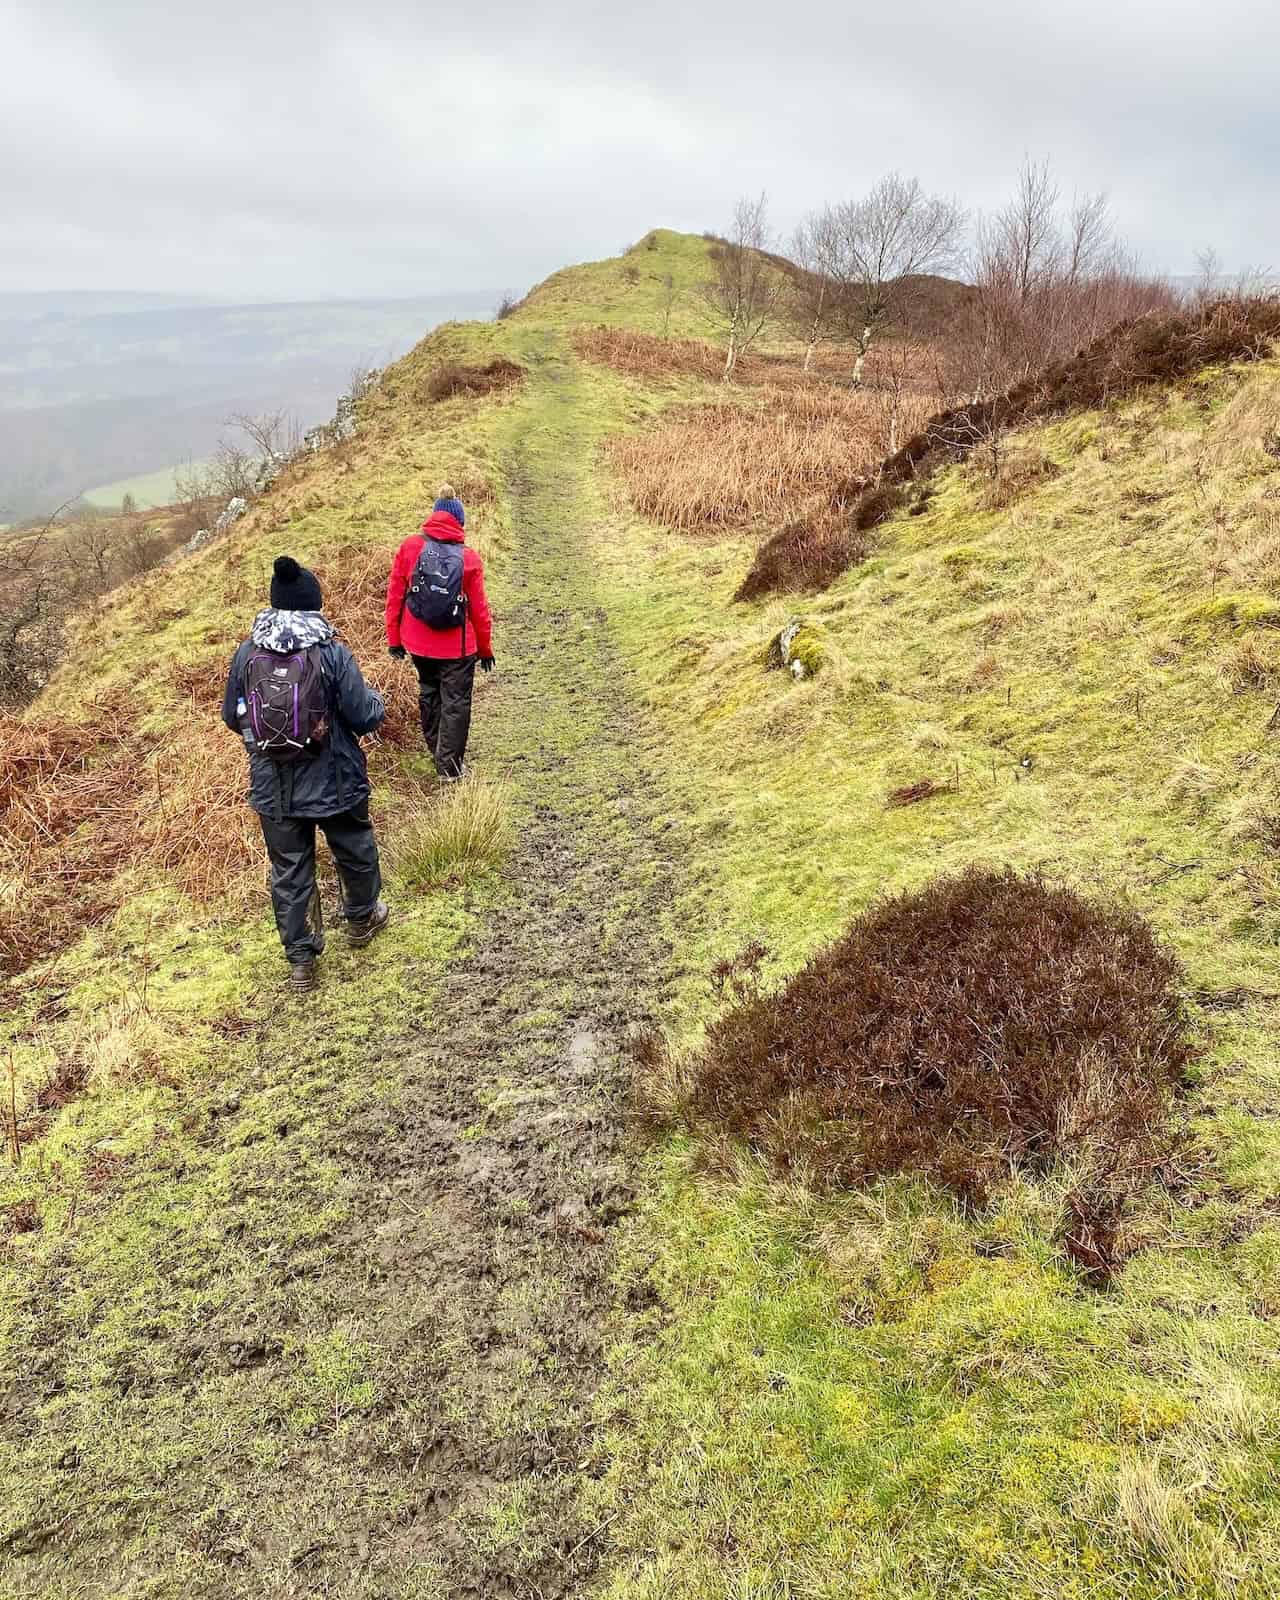 The path across the Hawnby Hill ridge. The highest point is at the northern end of the hill, at 298 meters (977 feet).